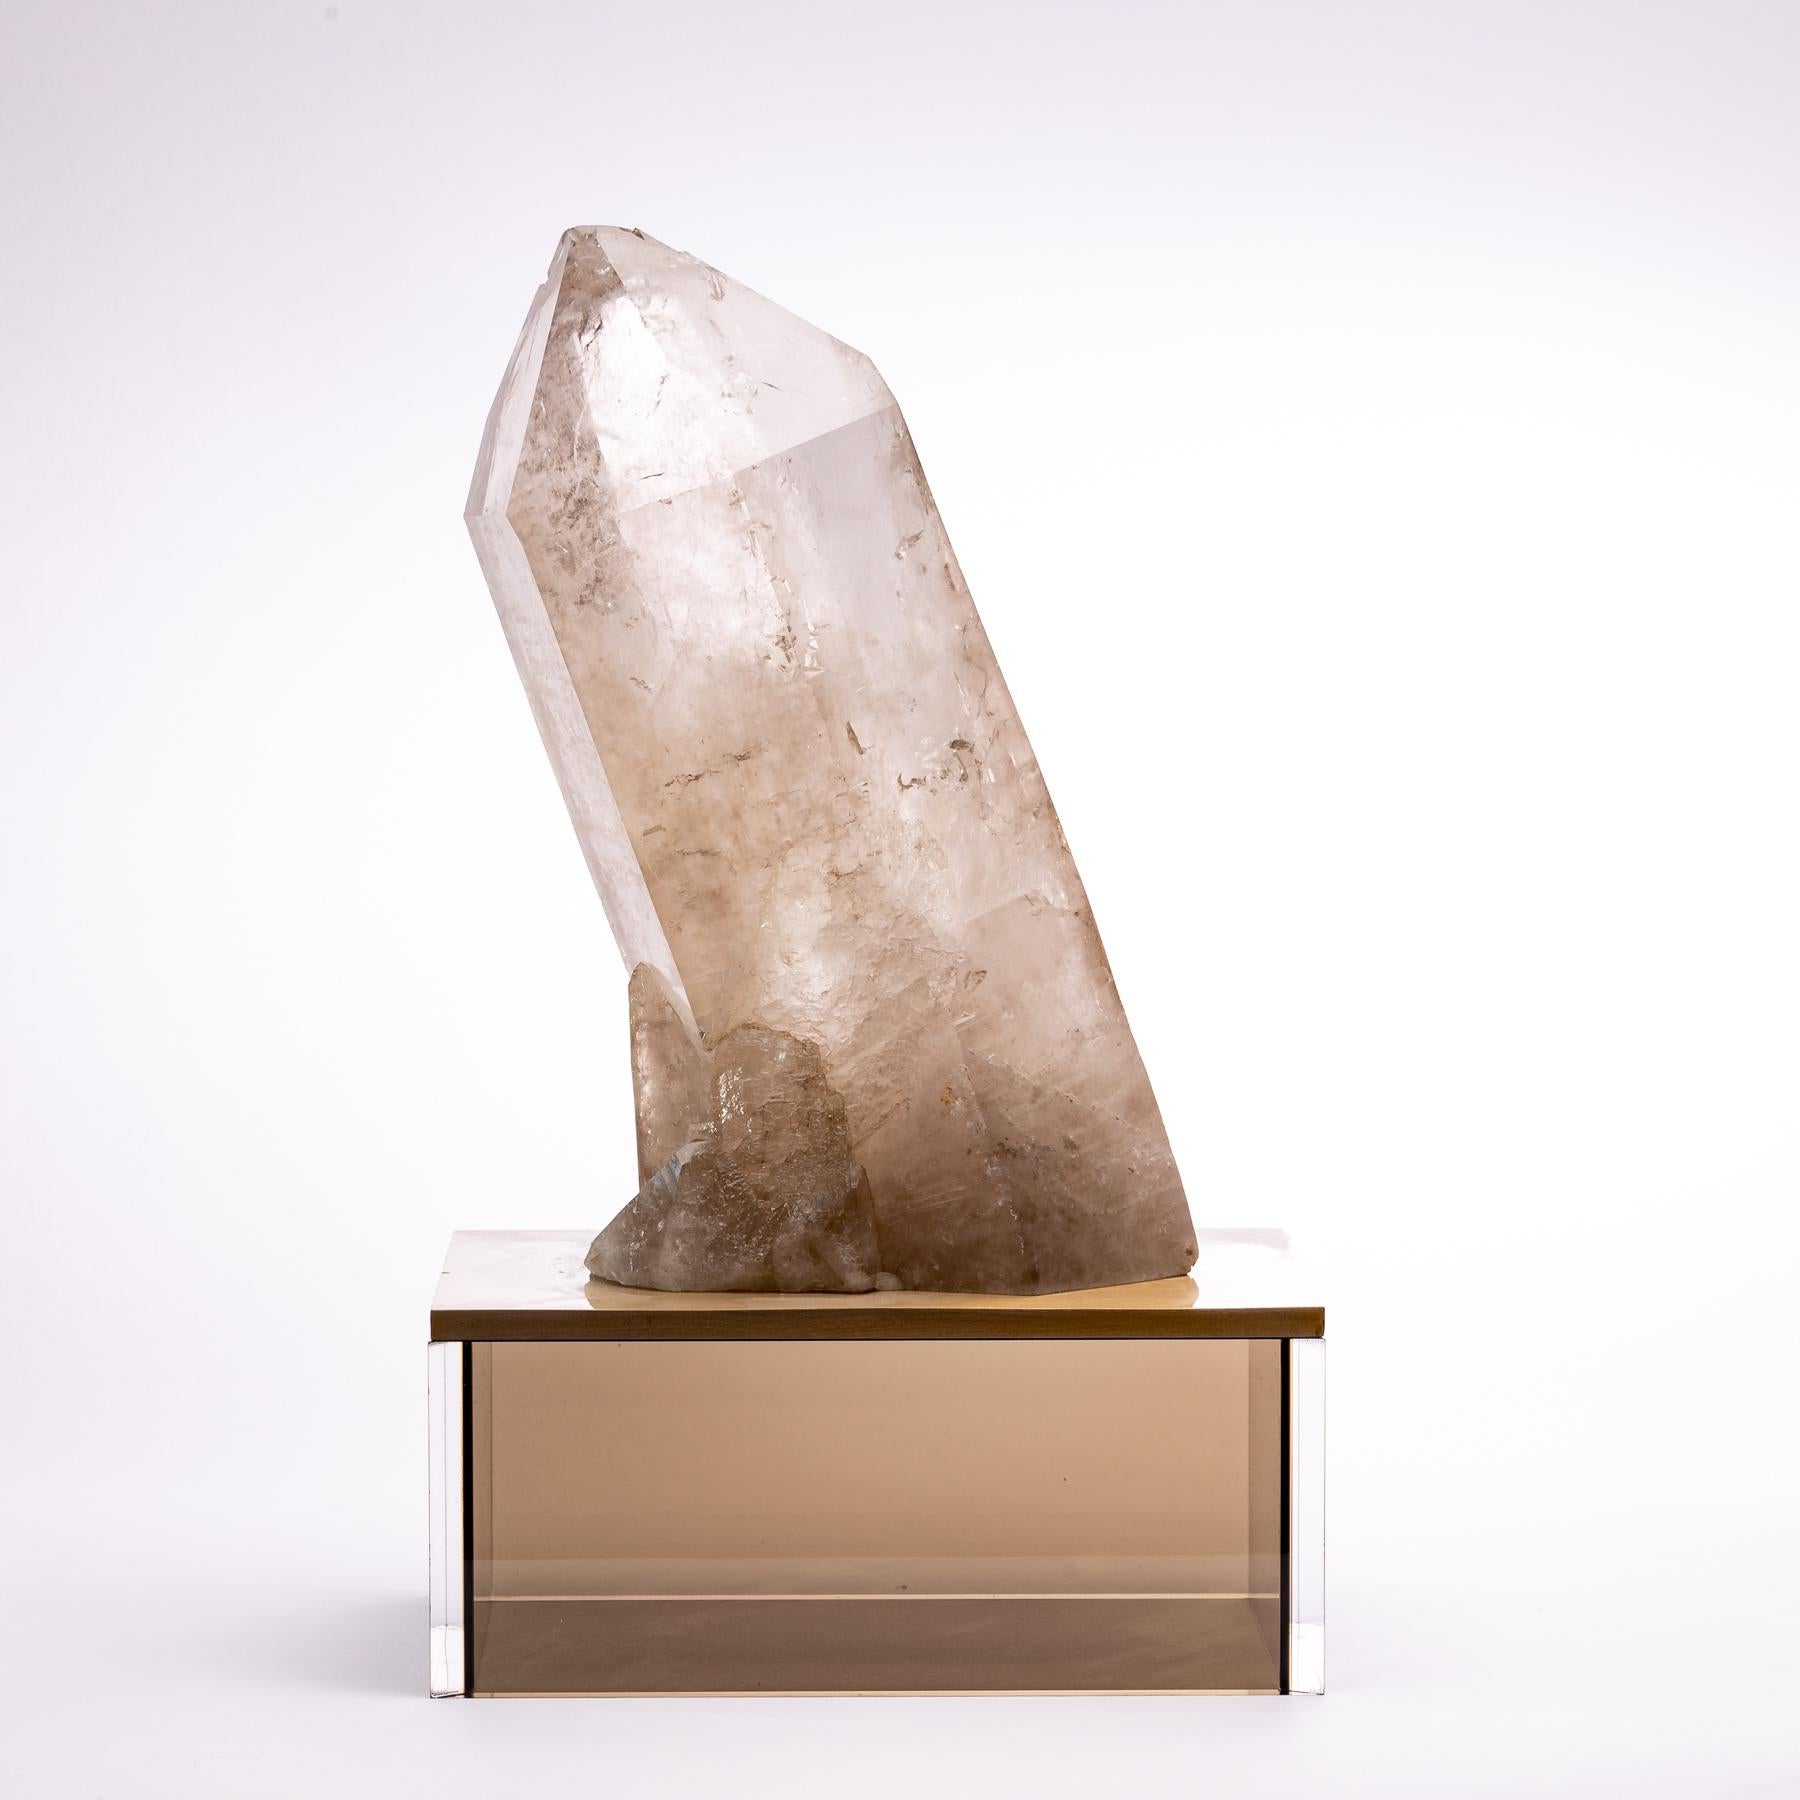 Natural large quartz point from Brazil mounted on a custom metal and smoky acrylic stand.